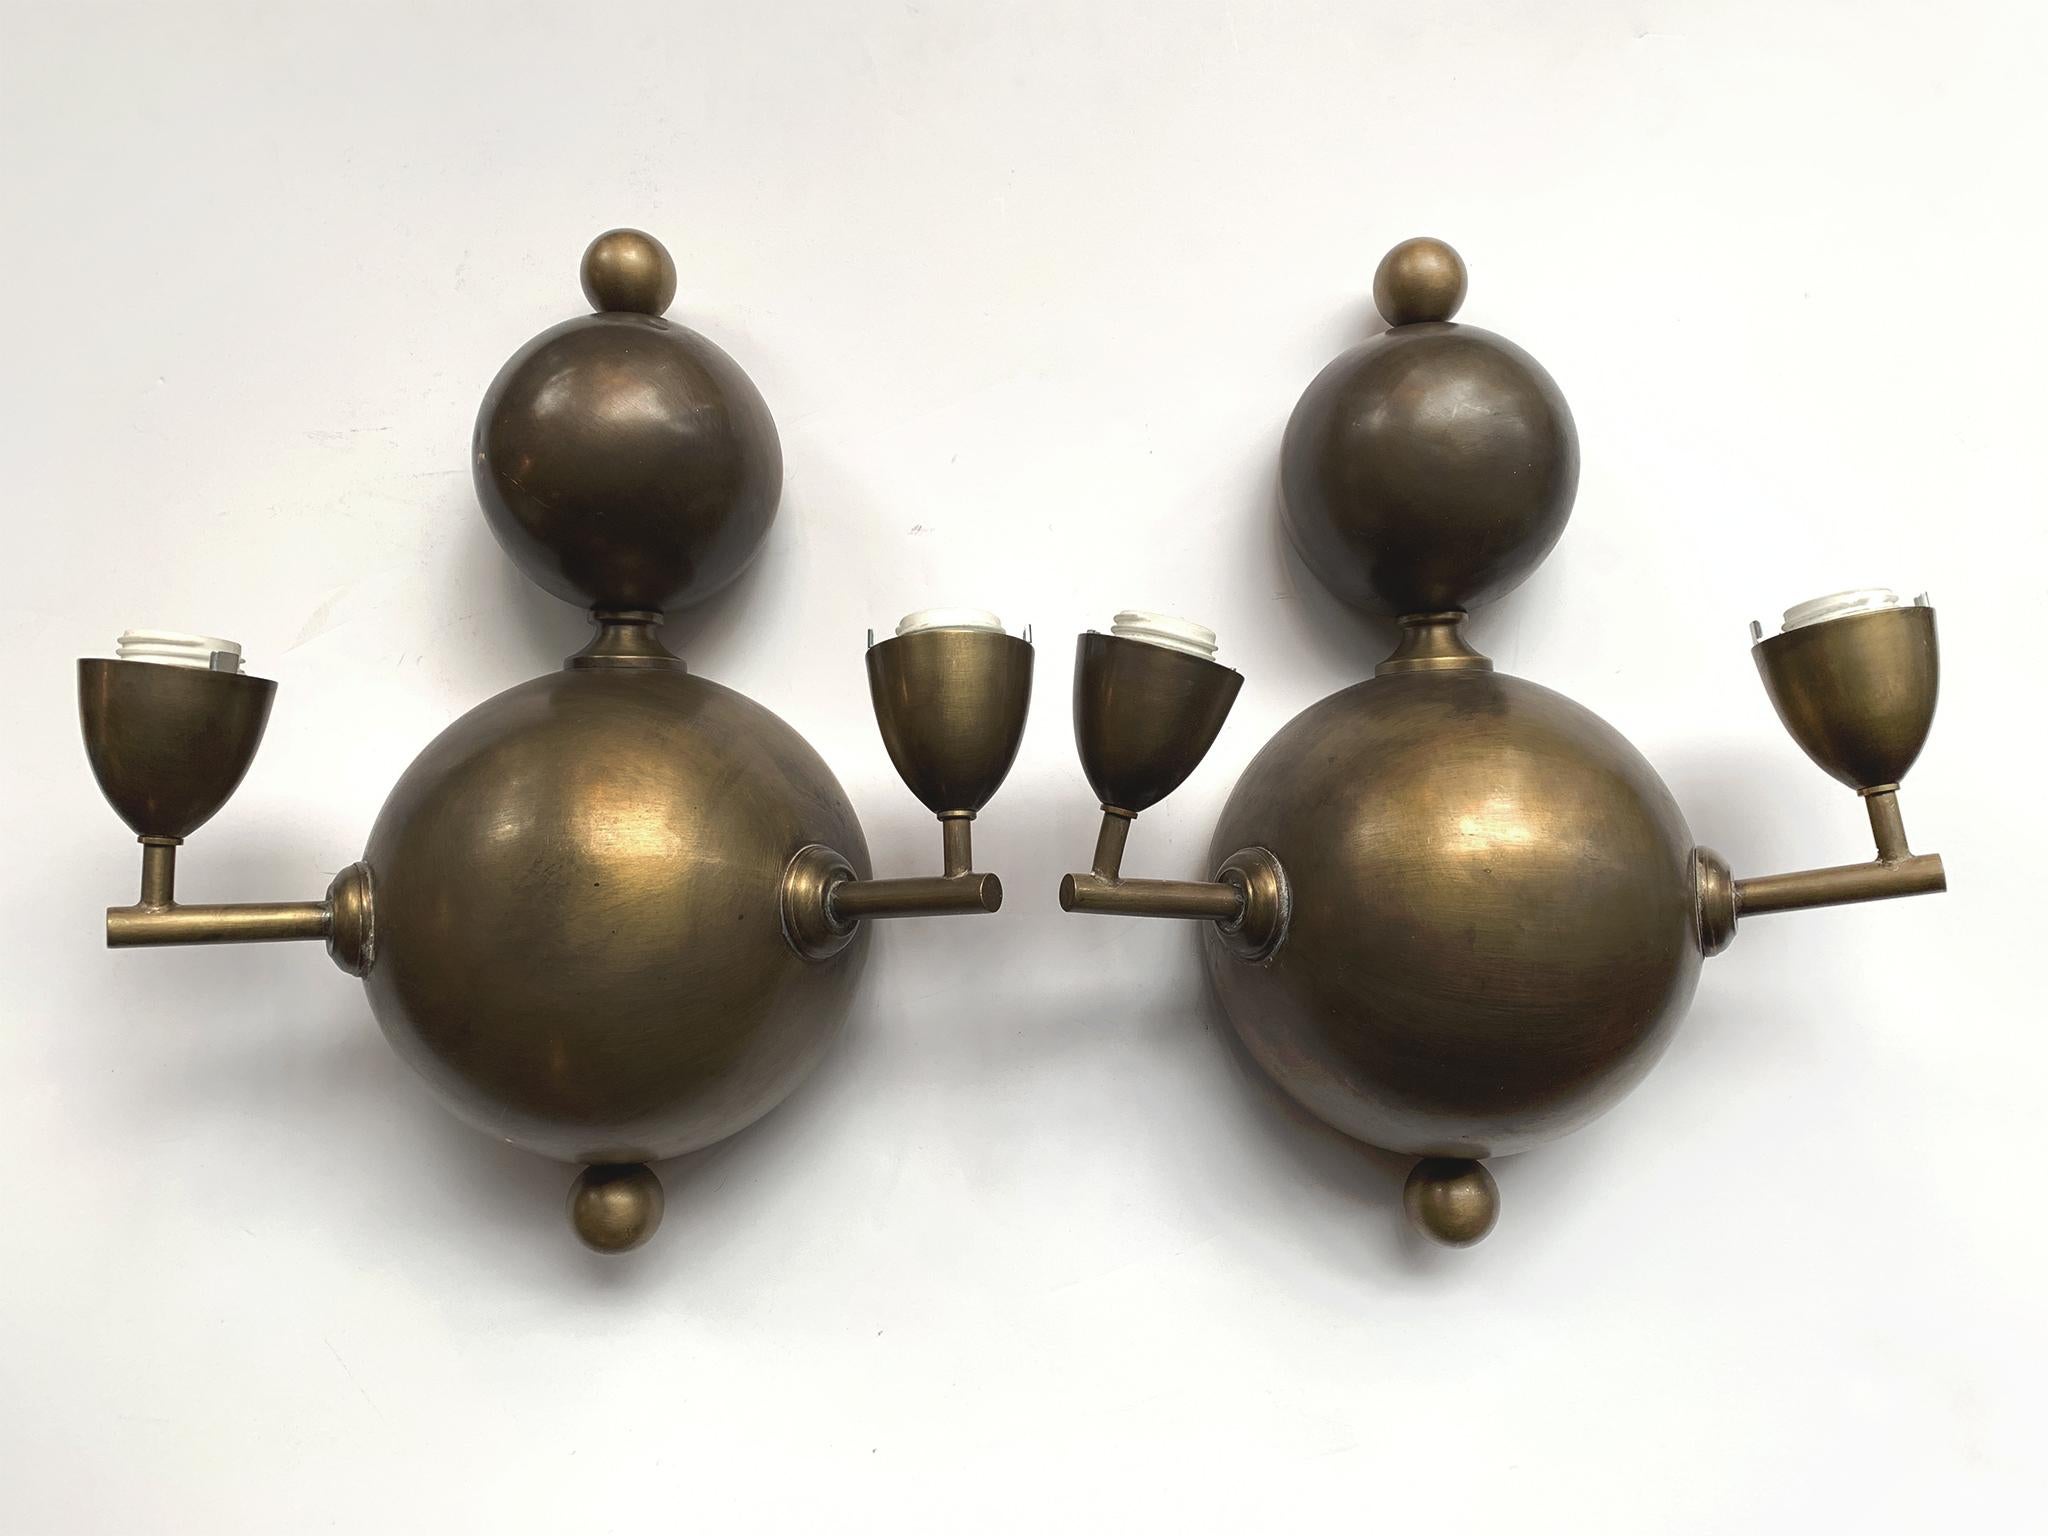 We love this pair of French sconces for their inventive forms, which bring to mind all the elegant qualities of Art Deco, modernism, and Space Age designs. Hemispheres make up the wonderful structure of the sconces capped at top and bottom with